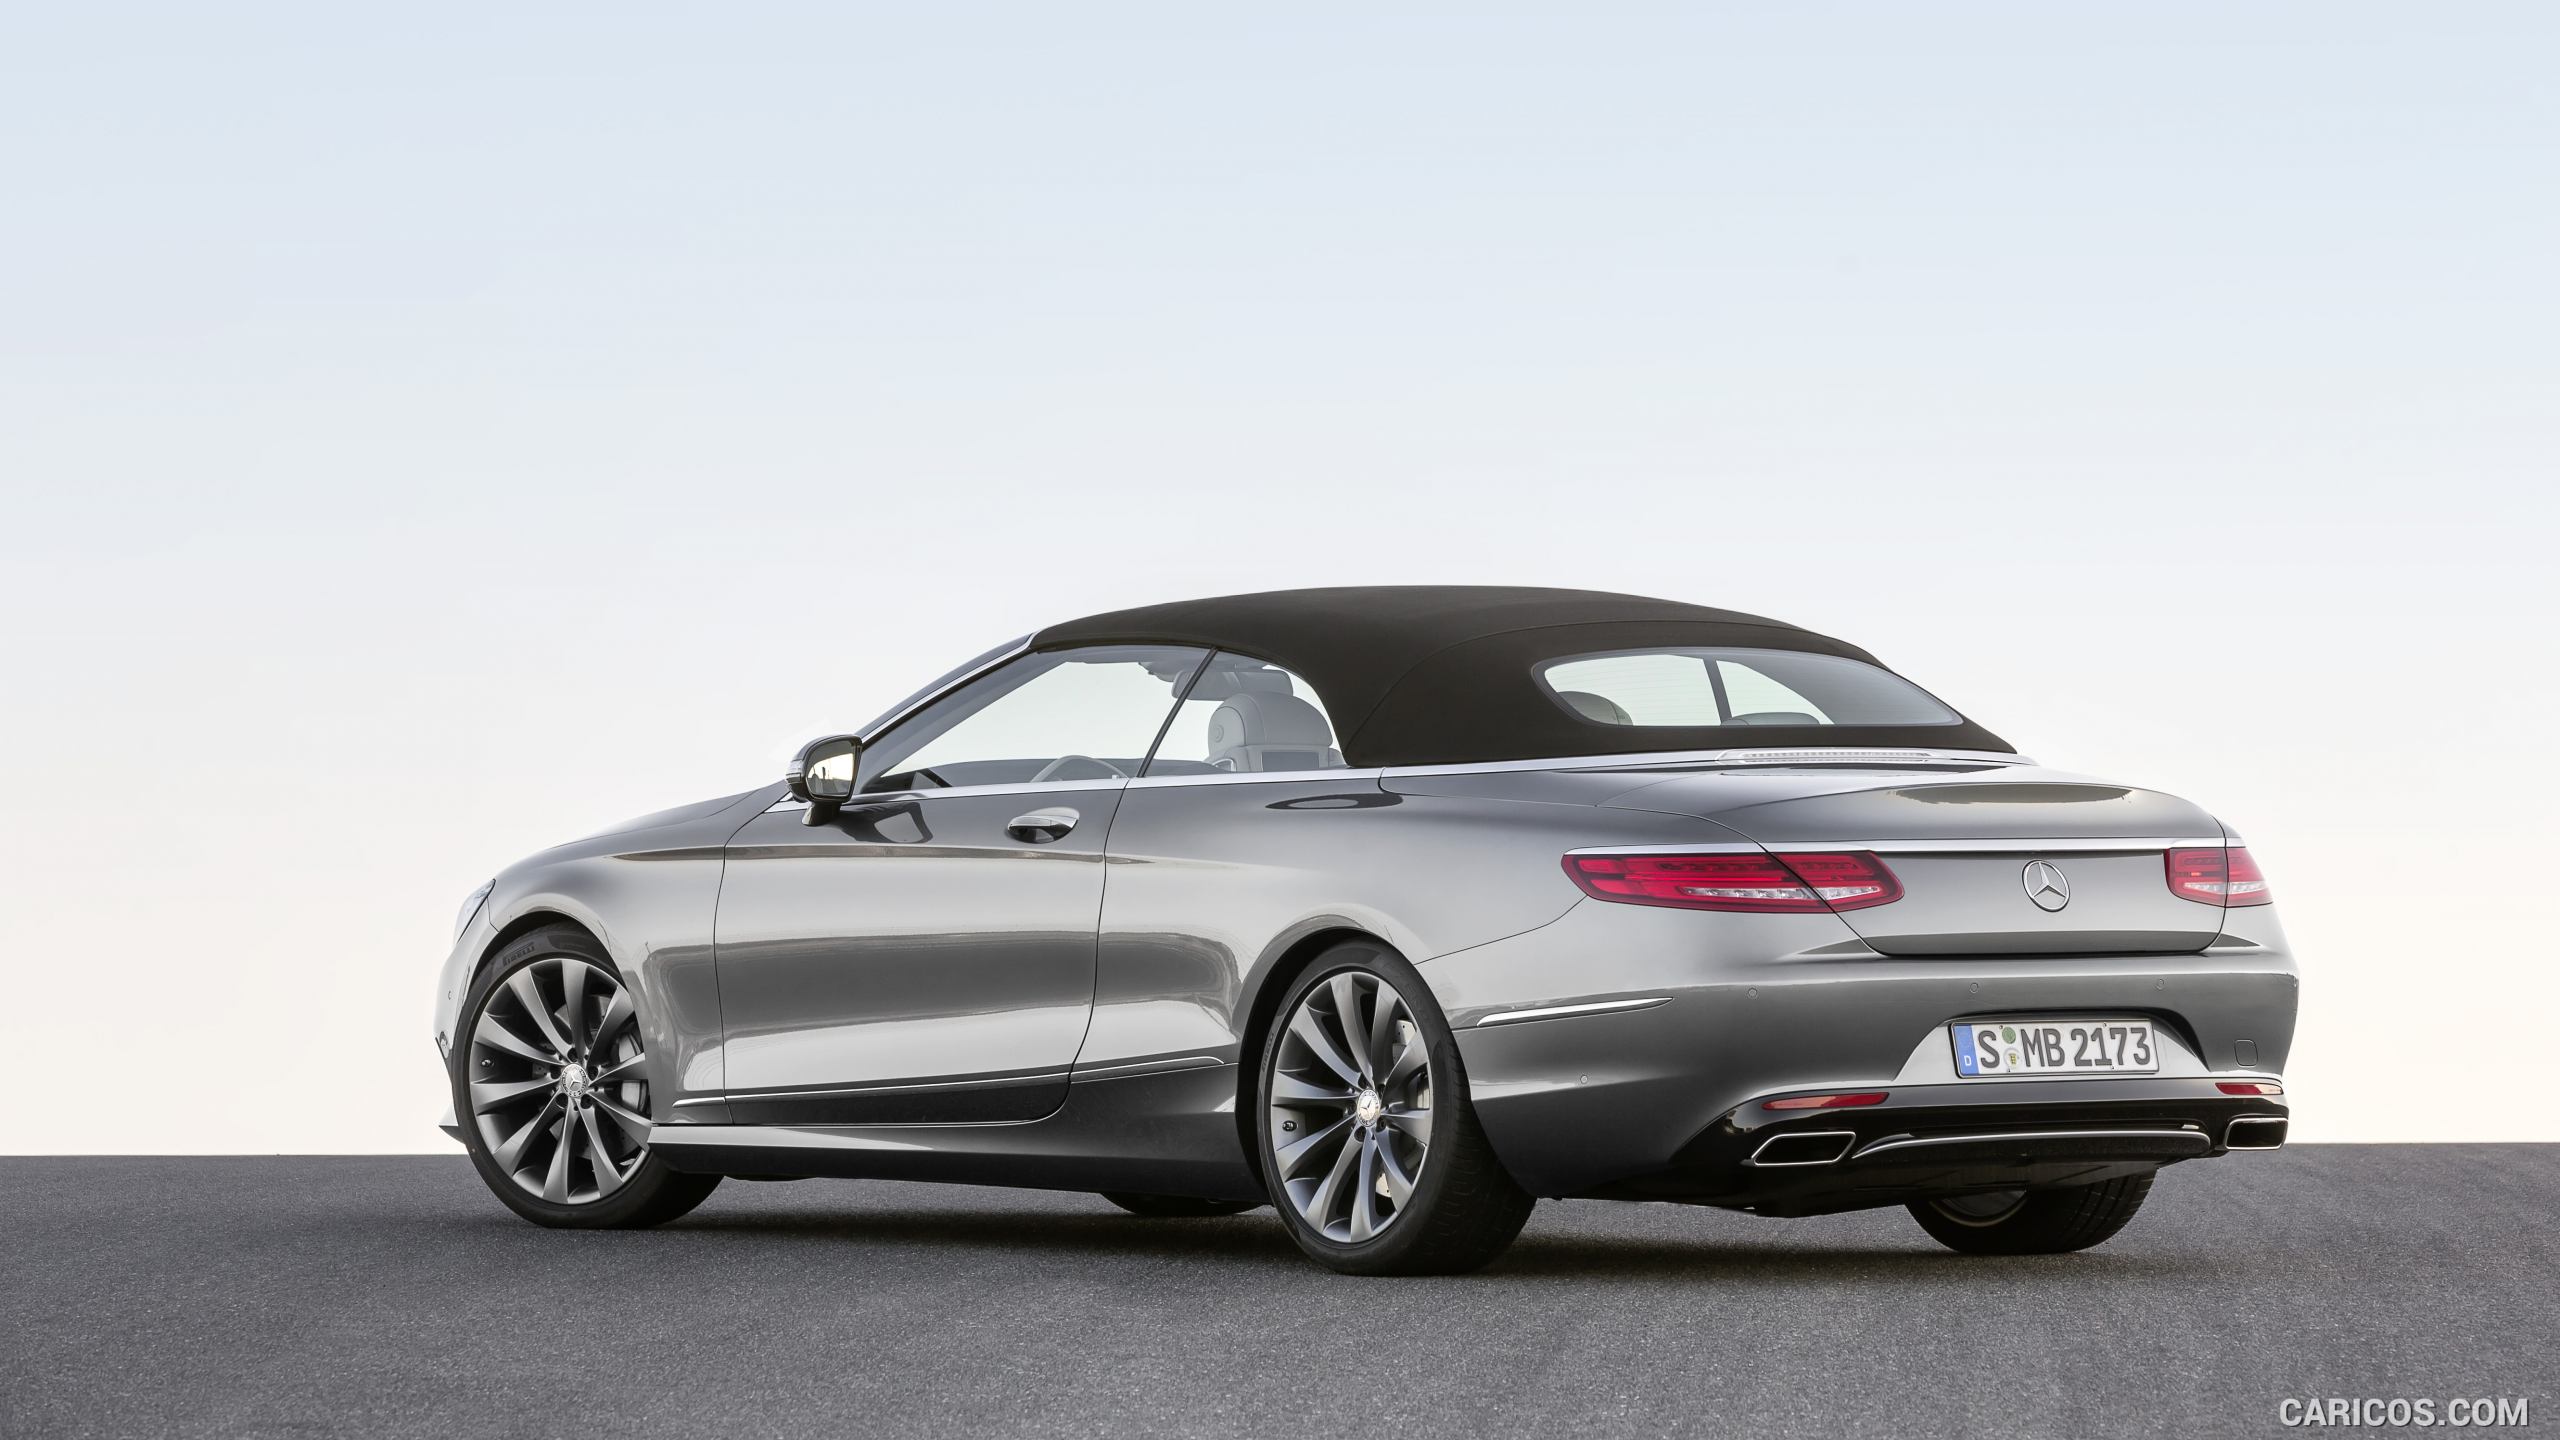 2017 Mercedes-Benz S-Class S500 Cabriolet (Selenit Grey) - Rear, #15 of 56